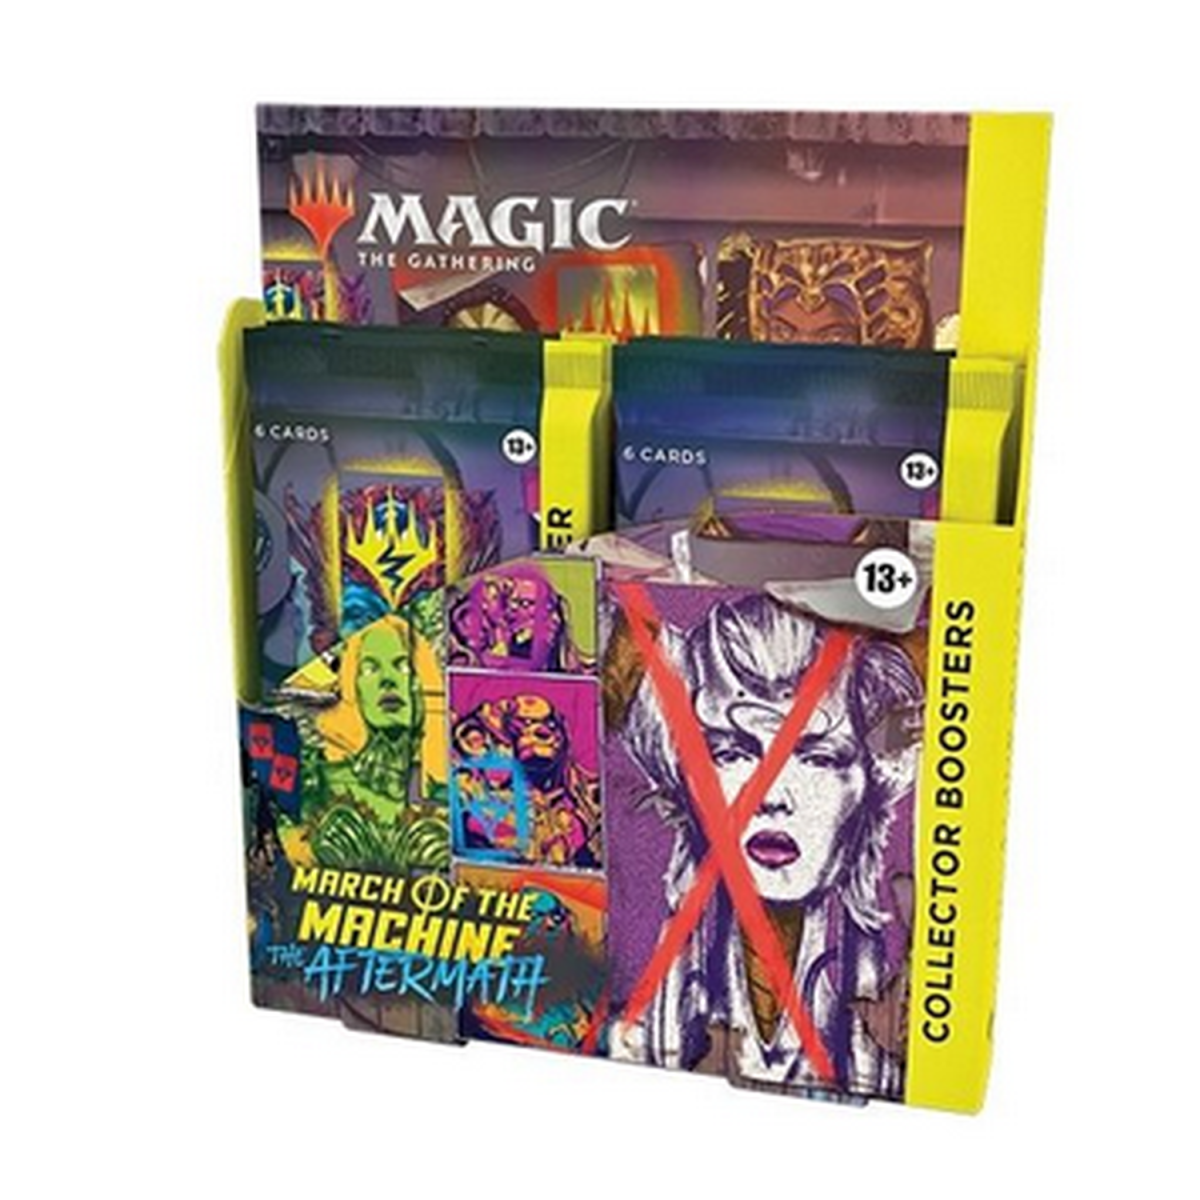 Item Magic The Gathering - Booster Box - Collector - Invasion of the Machines: The Day After Tomorrow - EN